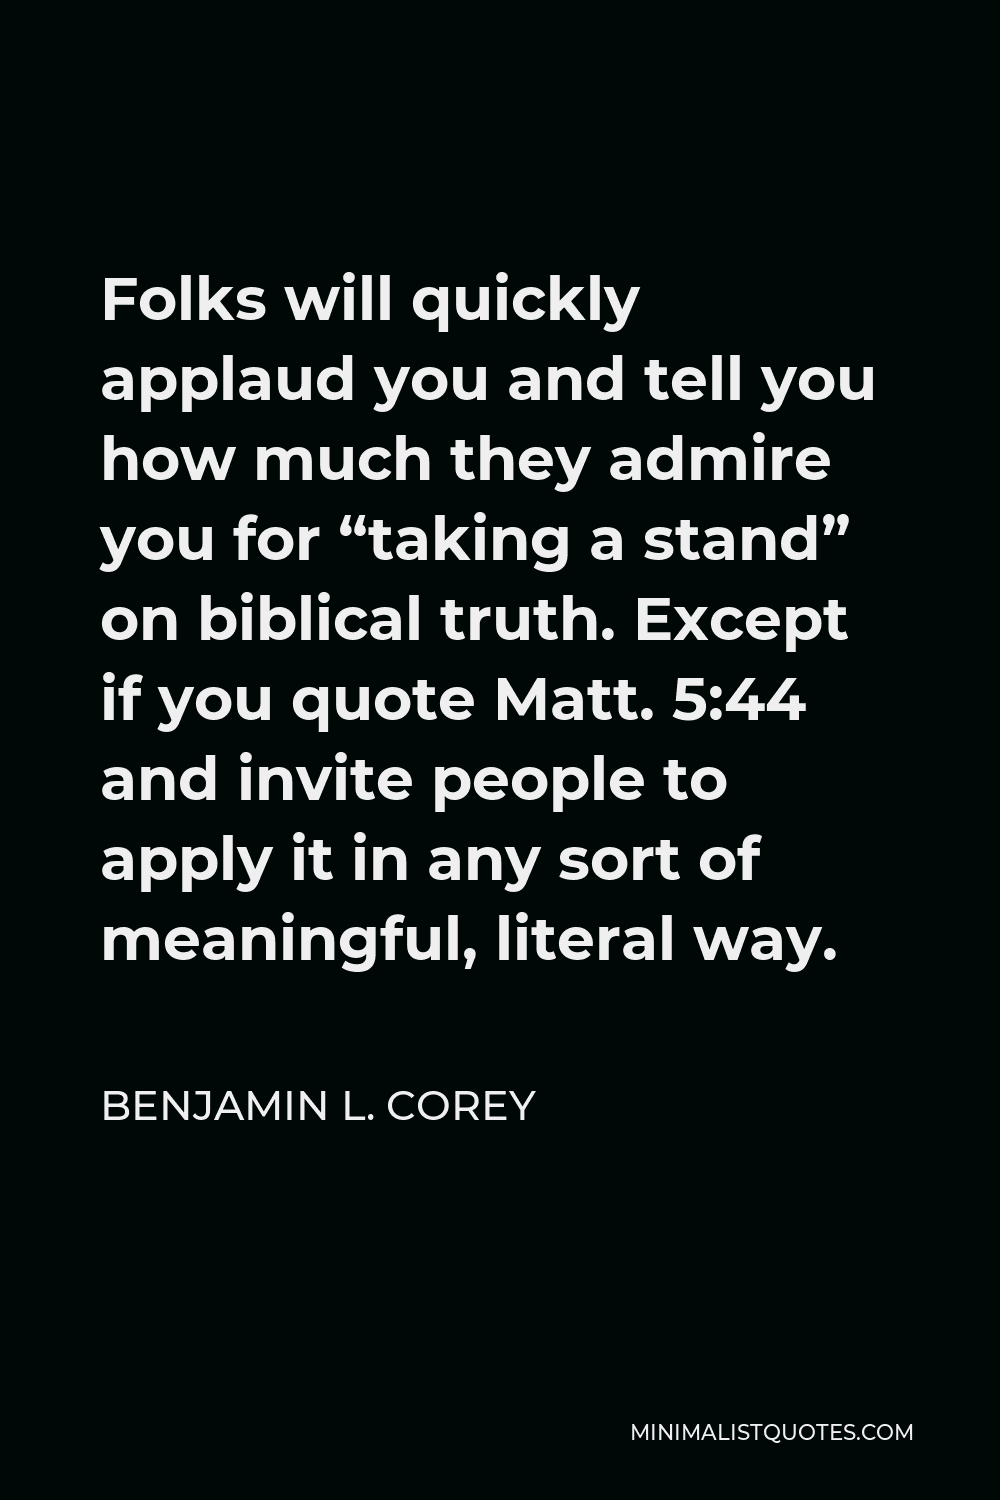 Benjamin L. Corey Quote - Folks will quickly applaud you and tell you how much they admire you for “taking a stand” on biblical truth. Except if you quote Matt. 5:44 and invite people to apply it in any sort of meaningful, literal way.